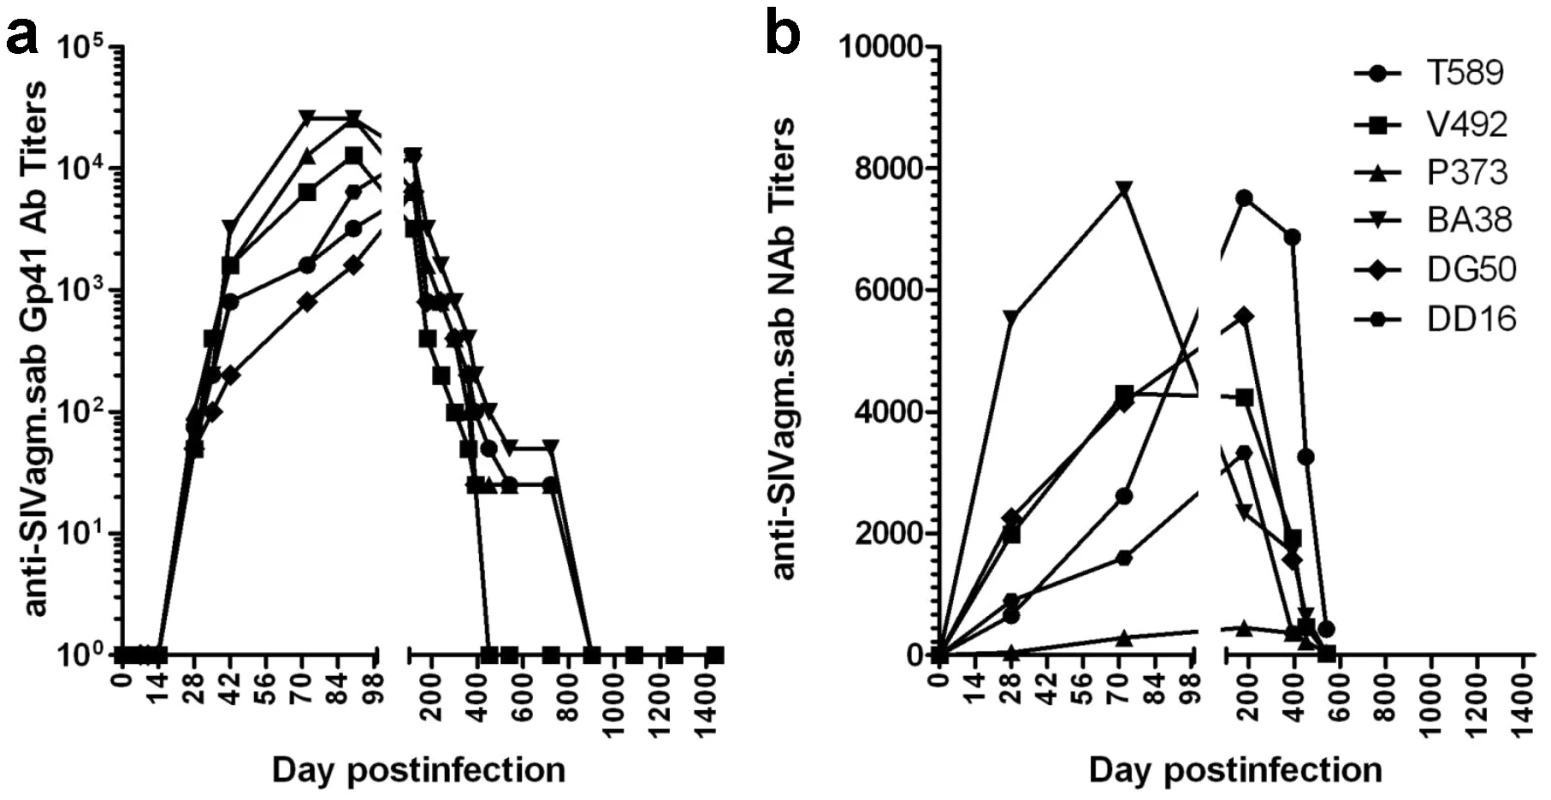 Control of SIVagm replication in RMs was confirmed by seroreversion of anti-SIVagm binding and neutralizing antibodies.